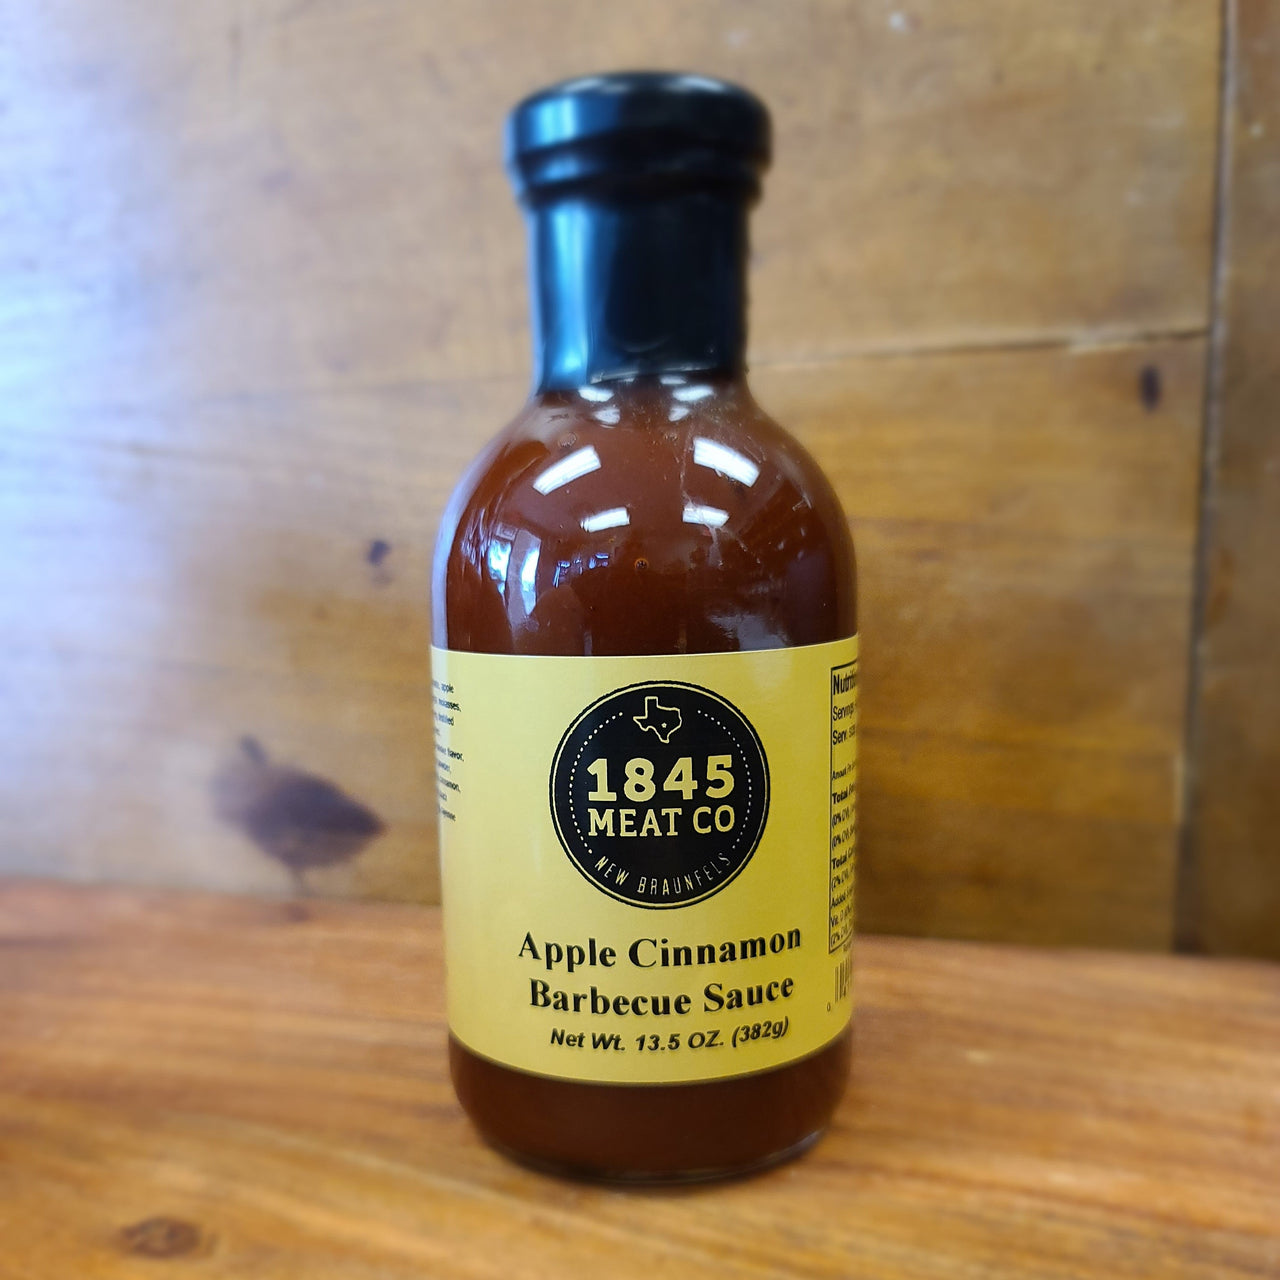 ﻿A classic BBQ Sauce with a little bit of sweet added to make it pleasantly different.